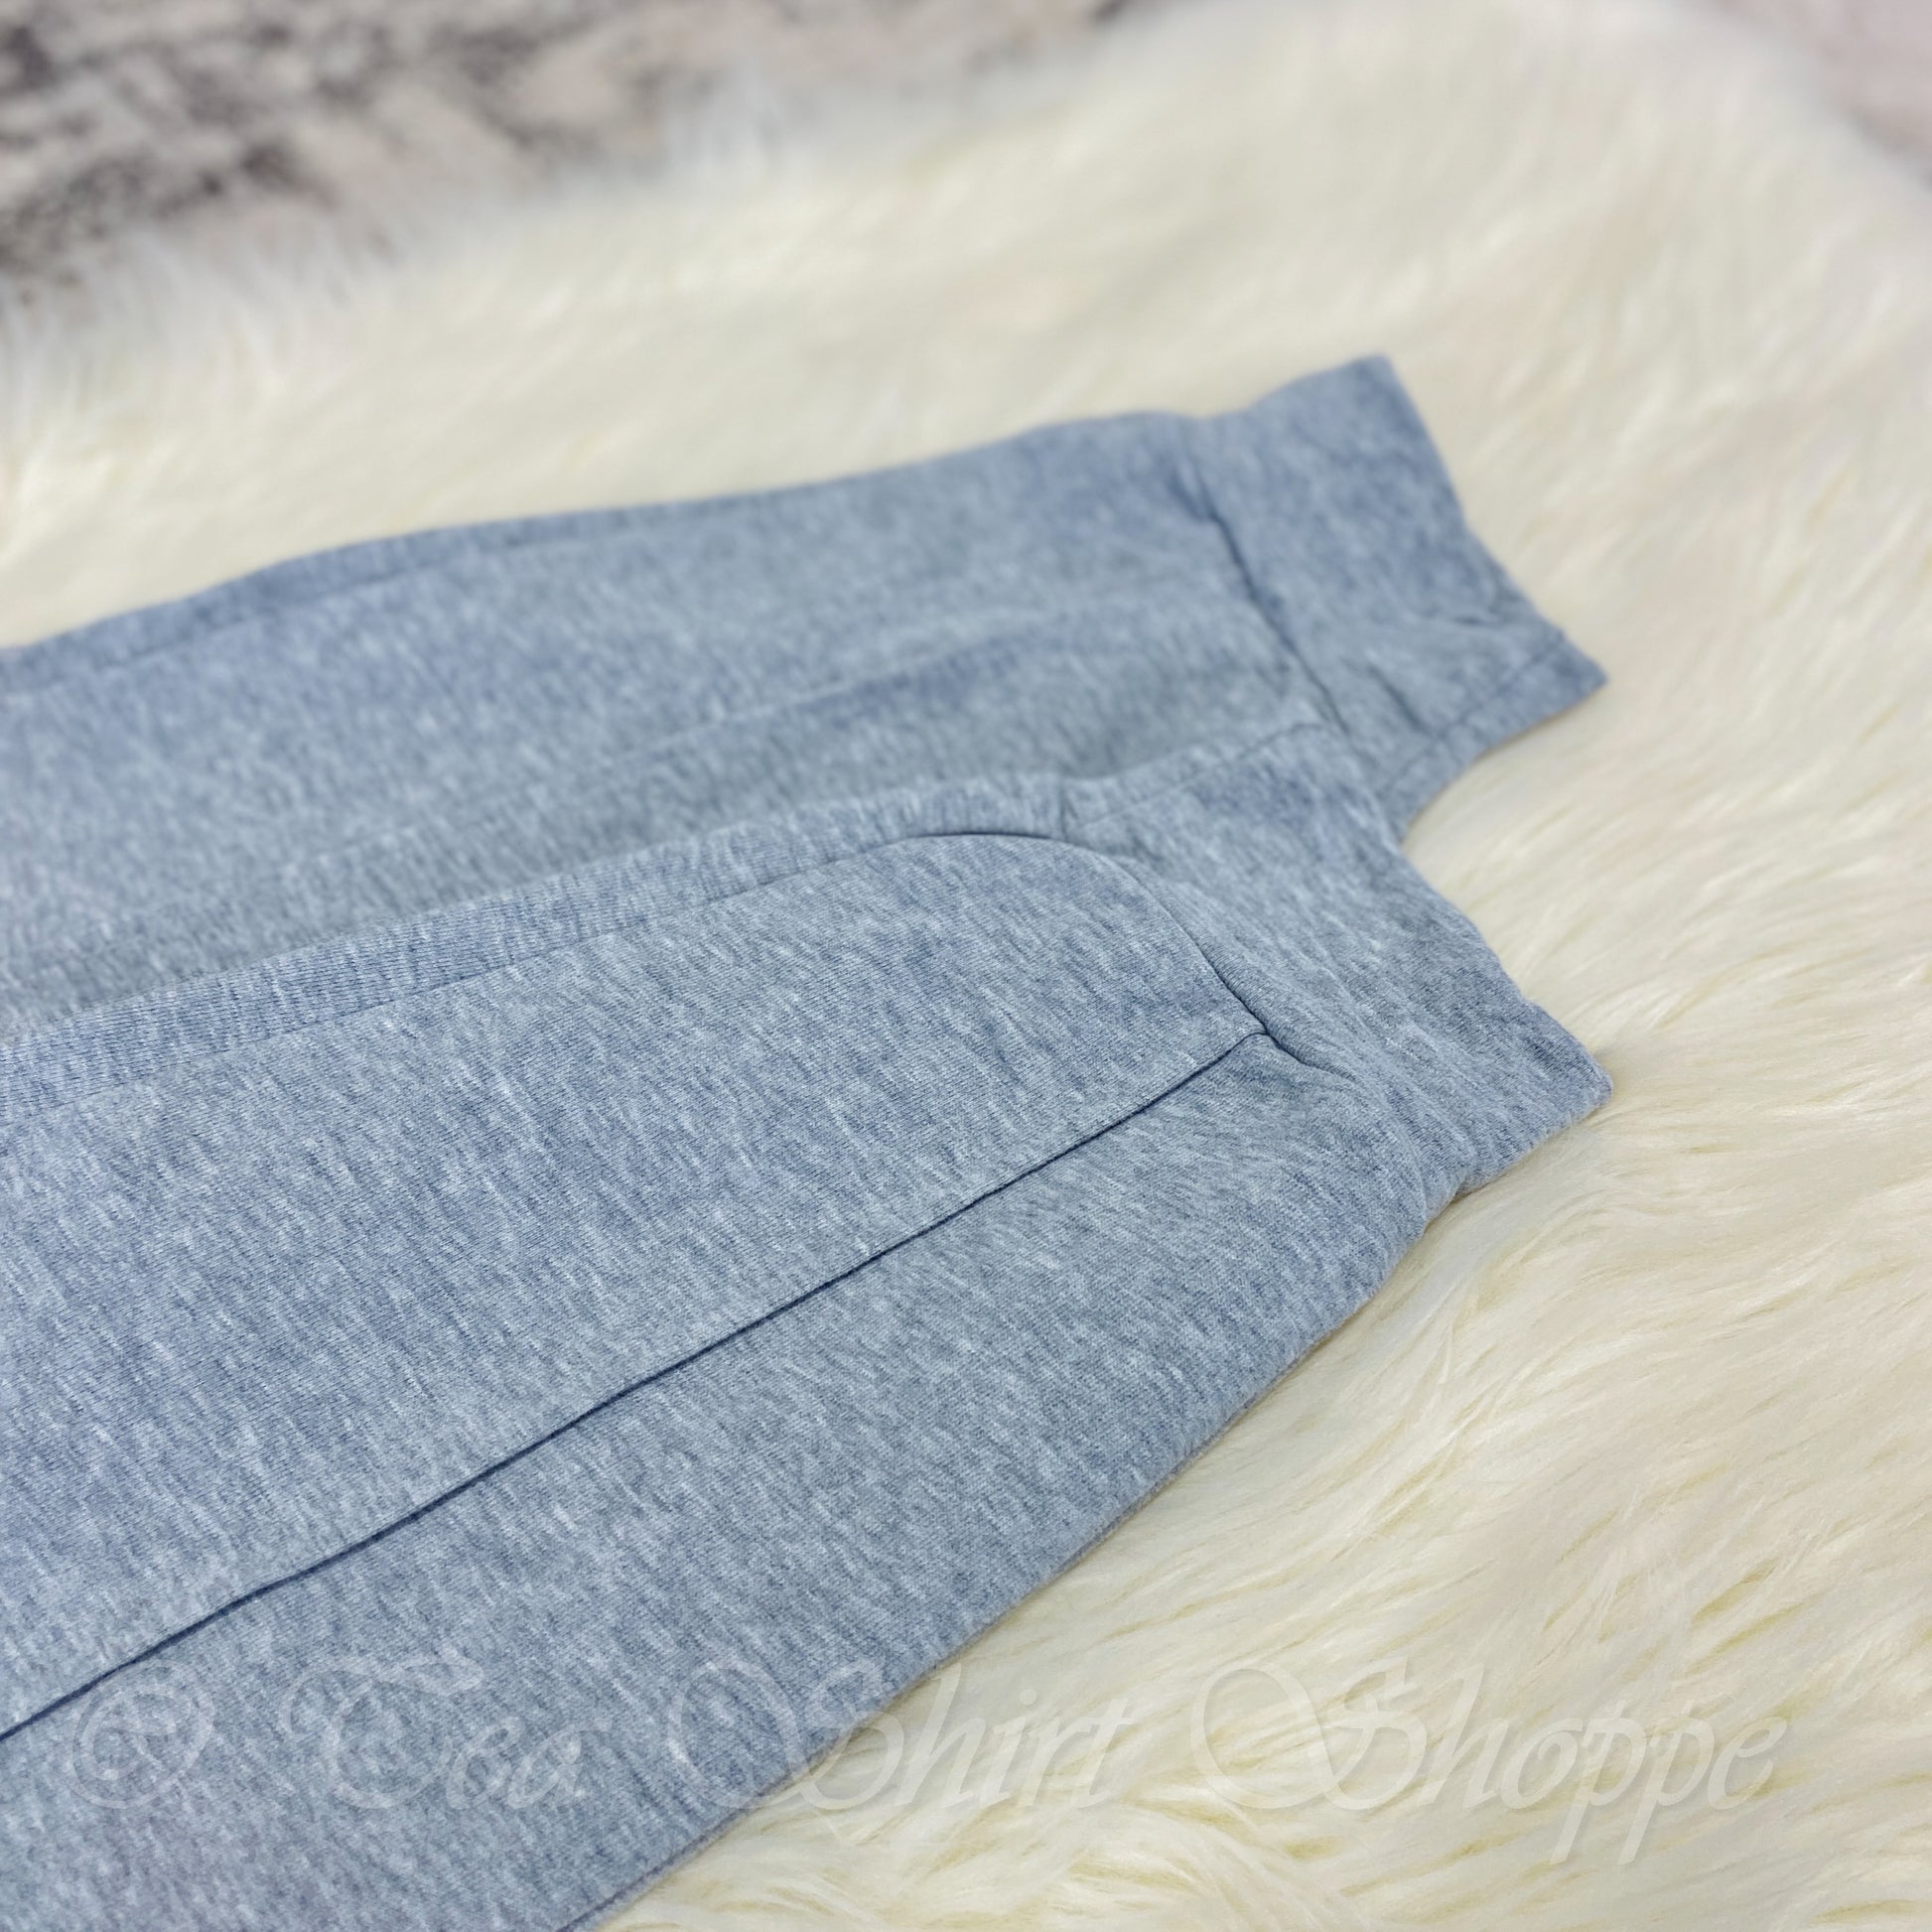 Crafted with the utmost care from soft, premium fabrics, these bottoms are sure to be your go-to for days spent relaxing at home. And why not pair them with our matching Heather Grey Terry Top? 